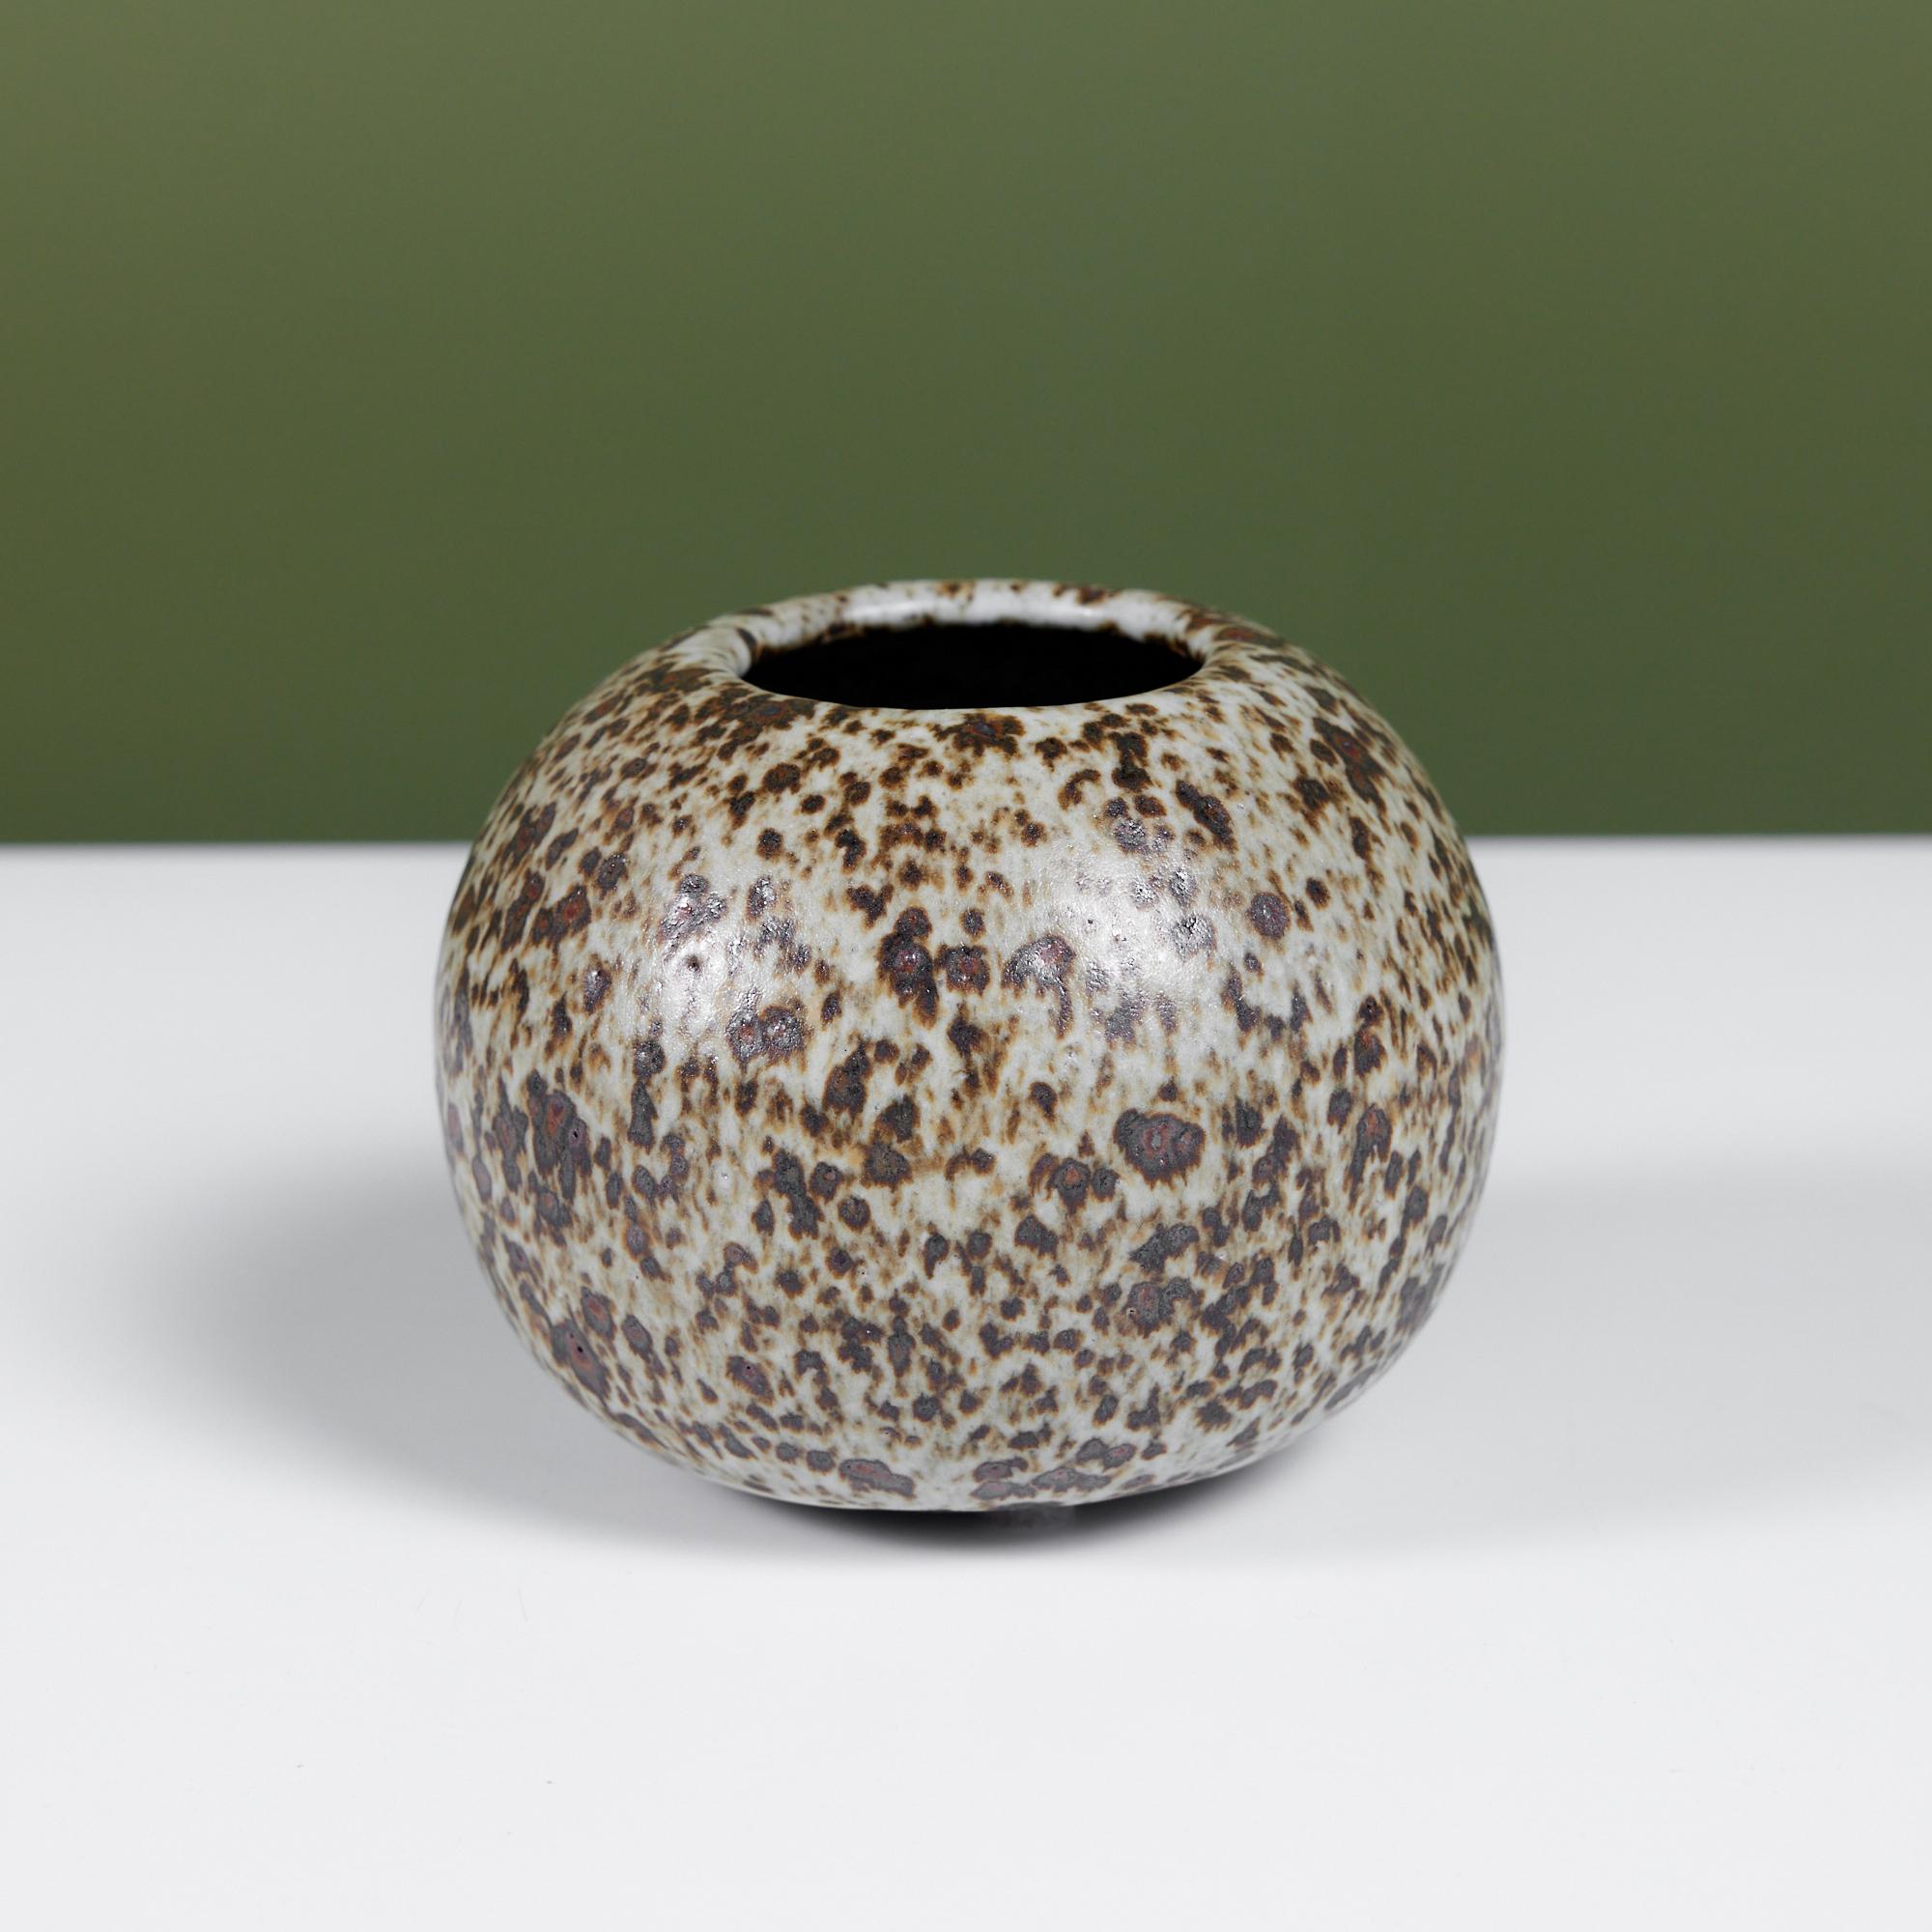 Wheel thrown studio ceramic bud vase with gray glaze. The rounded vessel features a gray and dark brown speckled glaze with circular opening at the center of the vase.

Dimensions
4